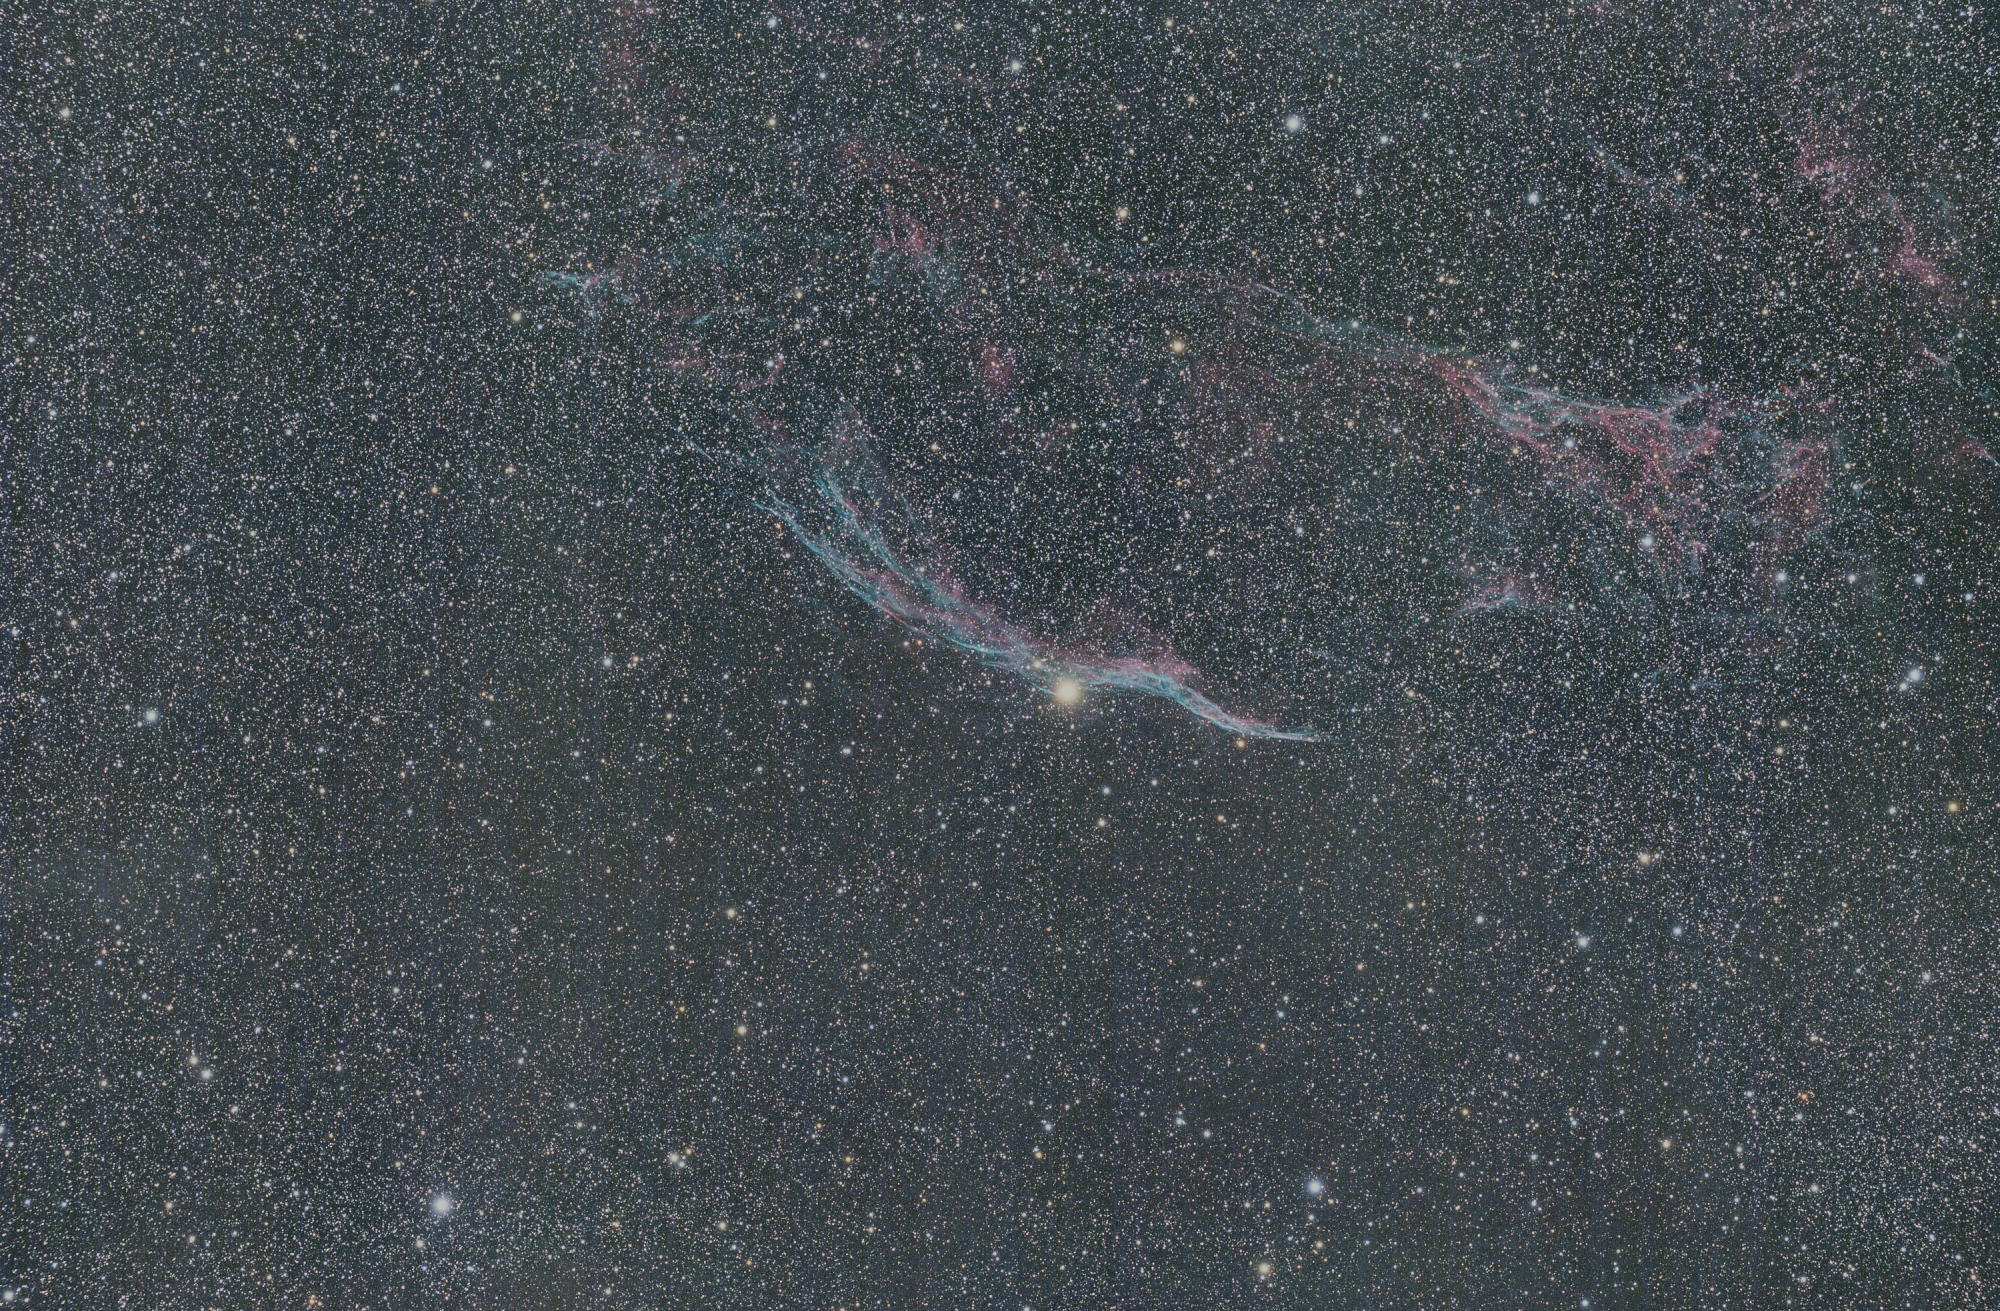 ngc6960-stax.png